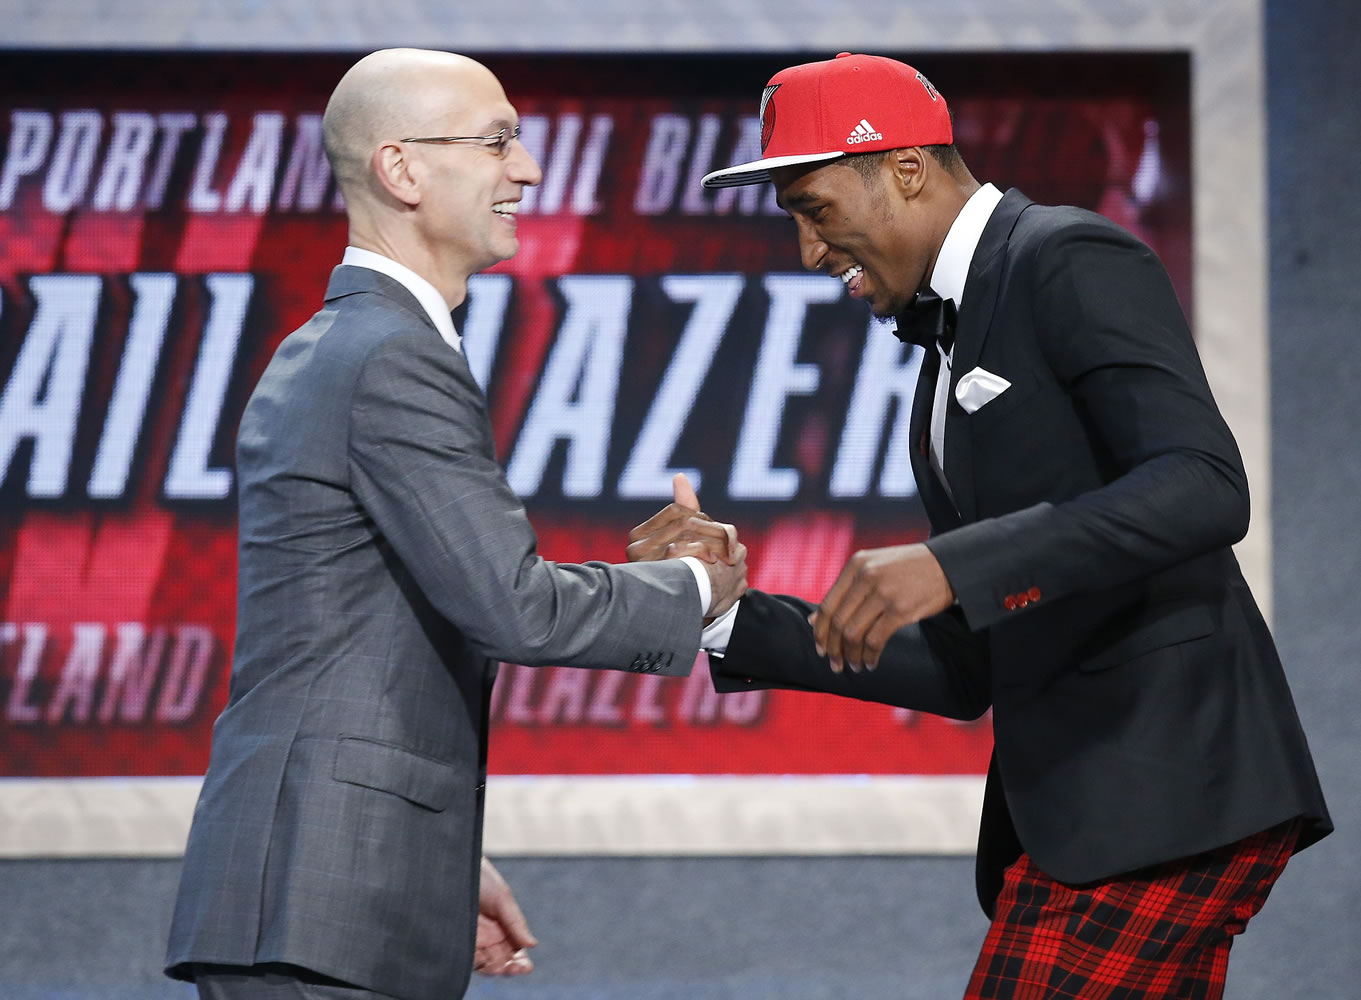 Rondae Hollis-Jefferson, right, greets NBA Commissioner Adam Silver after being selected 23rd overall by the Portland Trail Blazers during the NBA draft, Thursday, June 25, 2015, in New York.